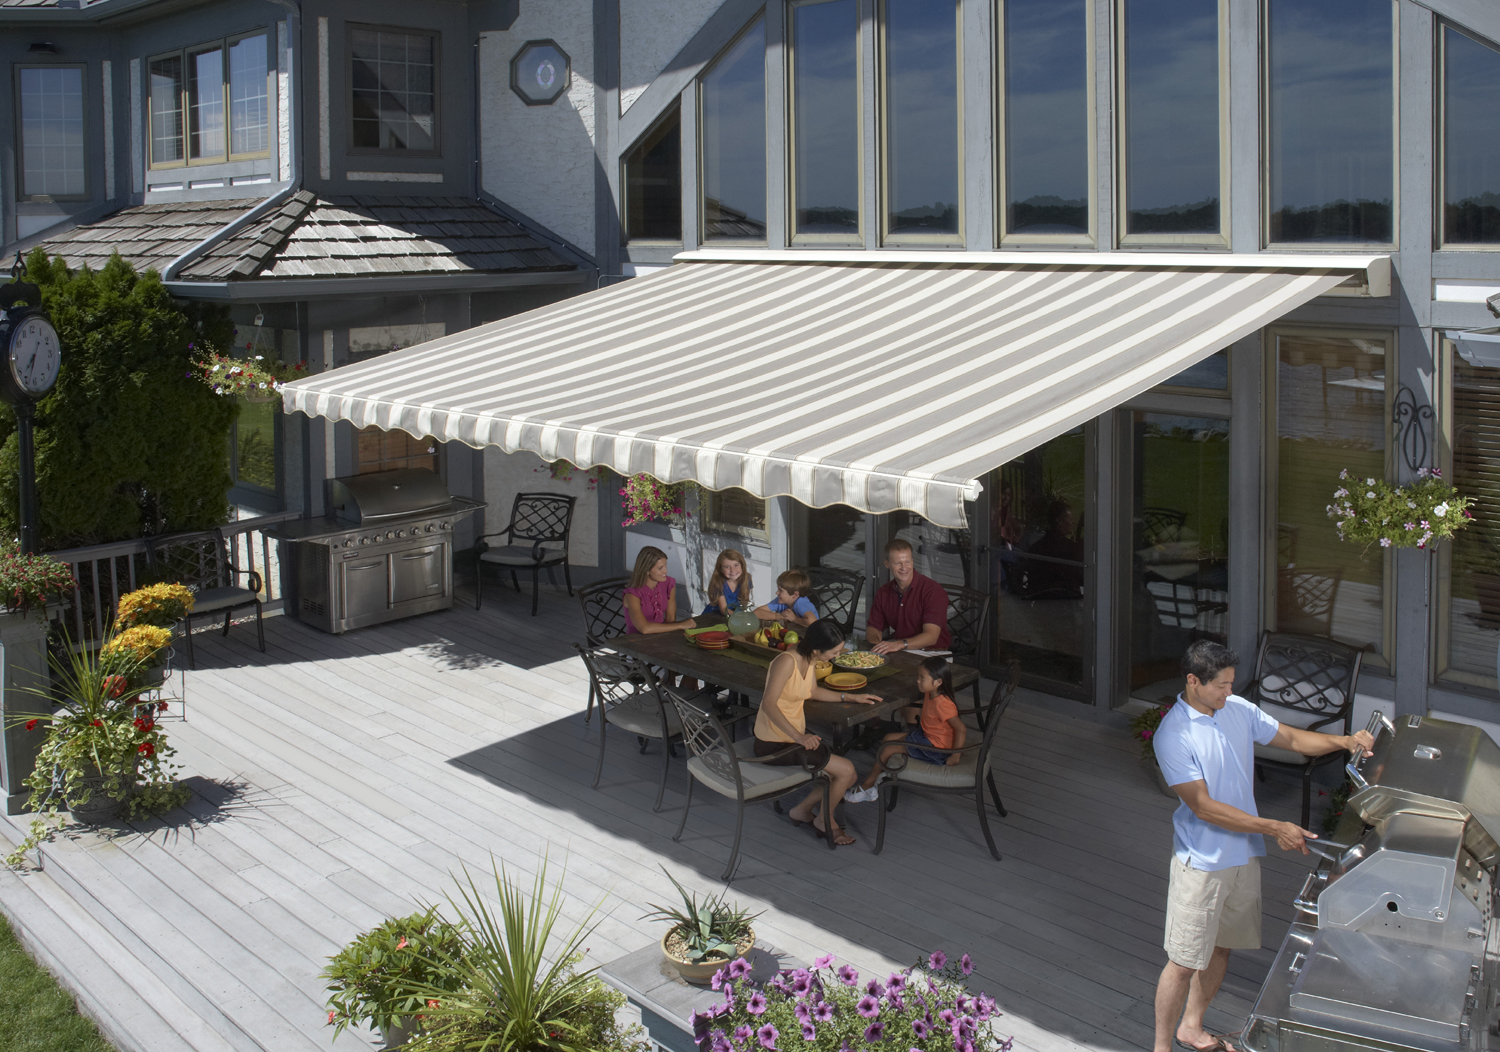 Stay Cool This Summer With A Terrace Awning post thumbnail image